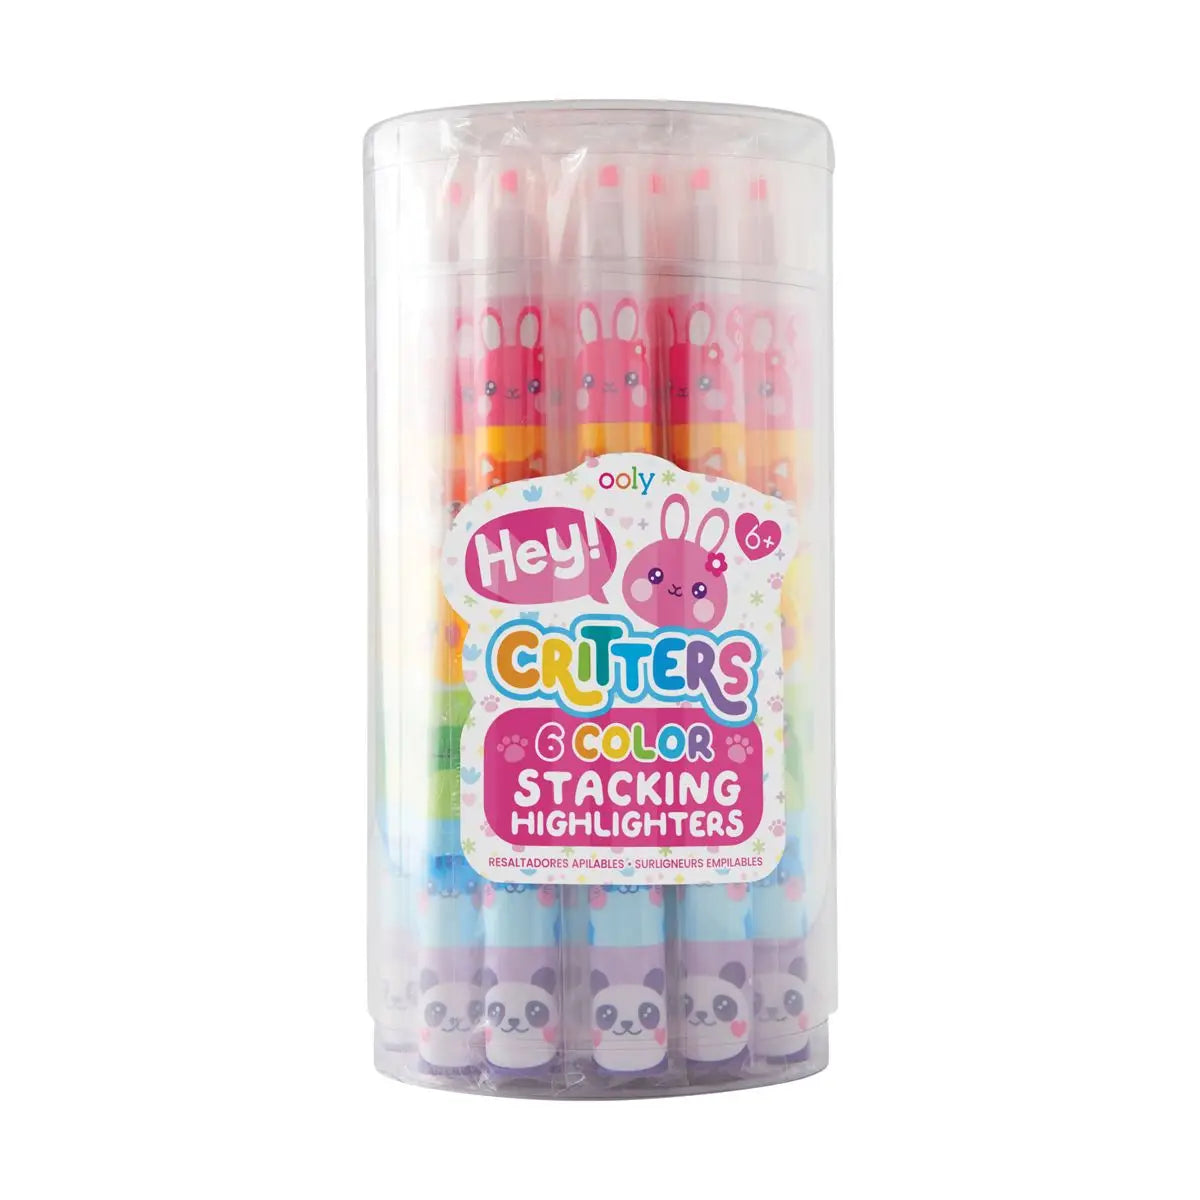 Hey Critters Stacking Highlighters